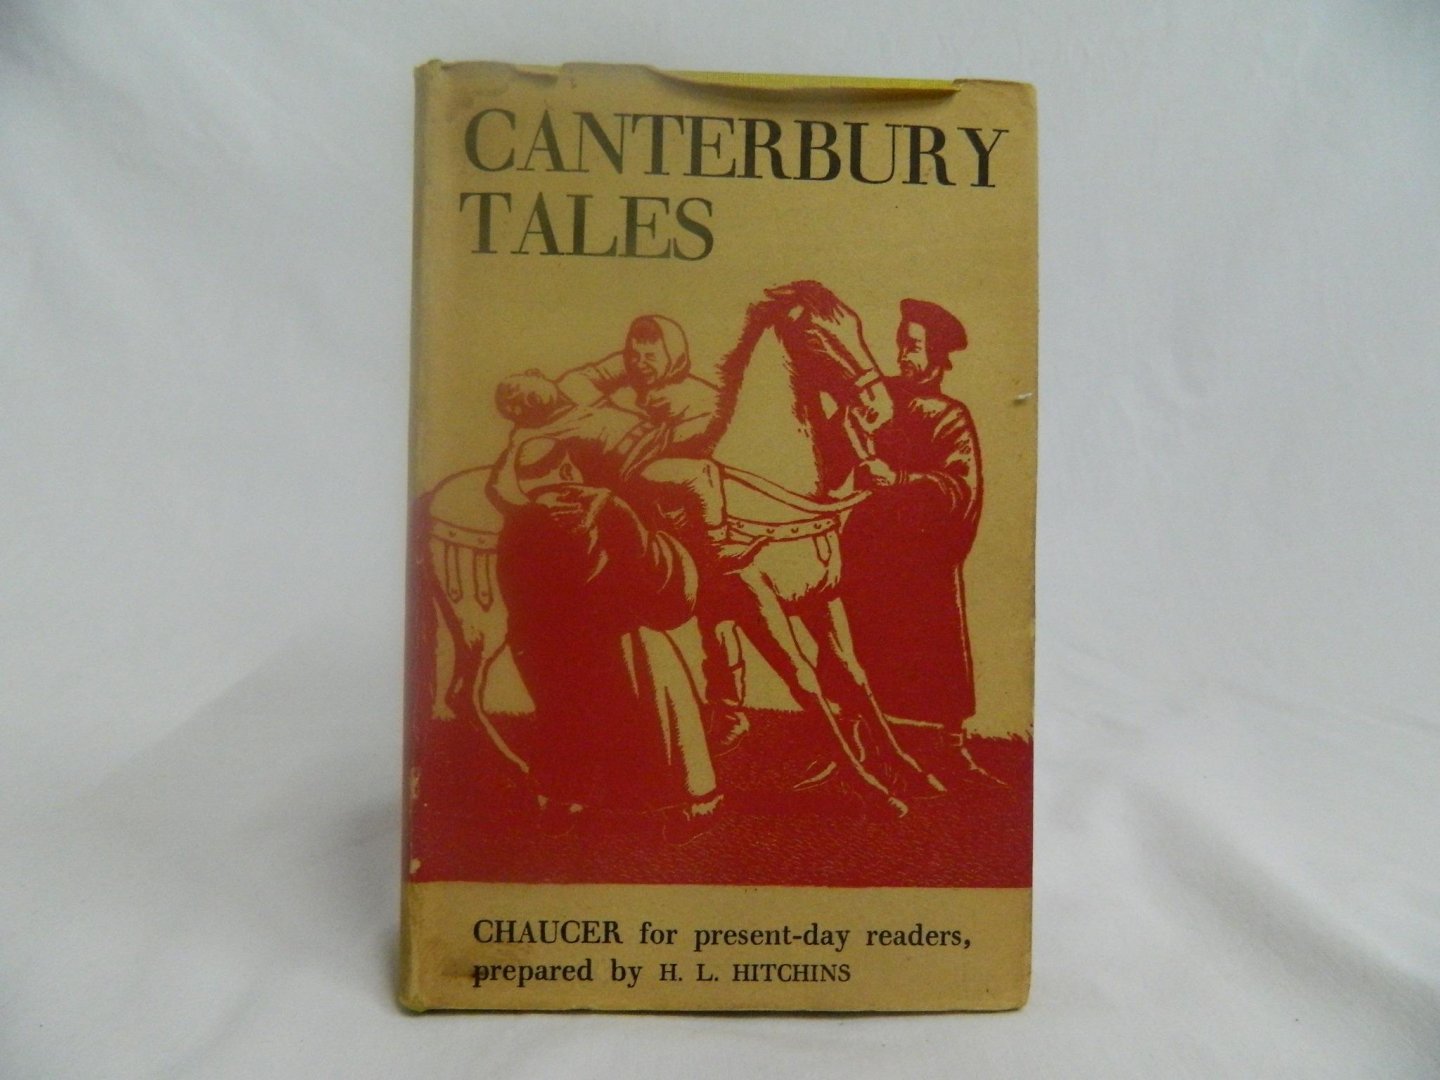 Chaucer, Geoffrey; Hitchins, H.L. - Canterbury Tales Chaucer for present-day readers, prepared by H.L Hitchens (3 foto's)